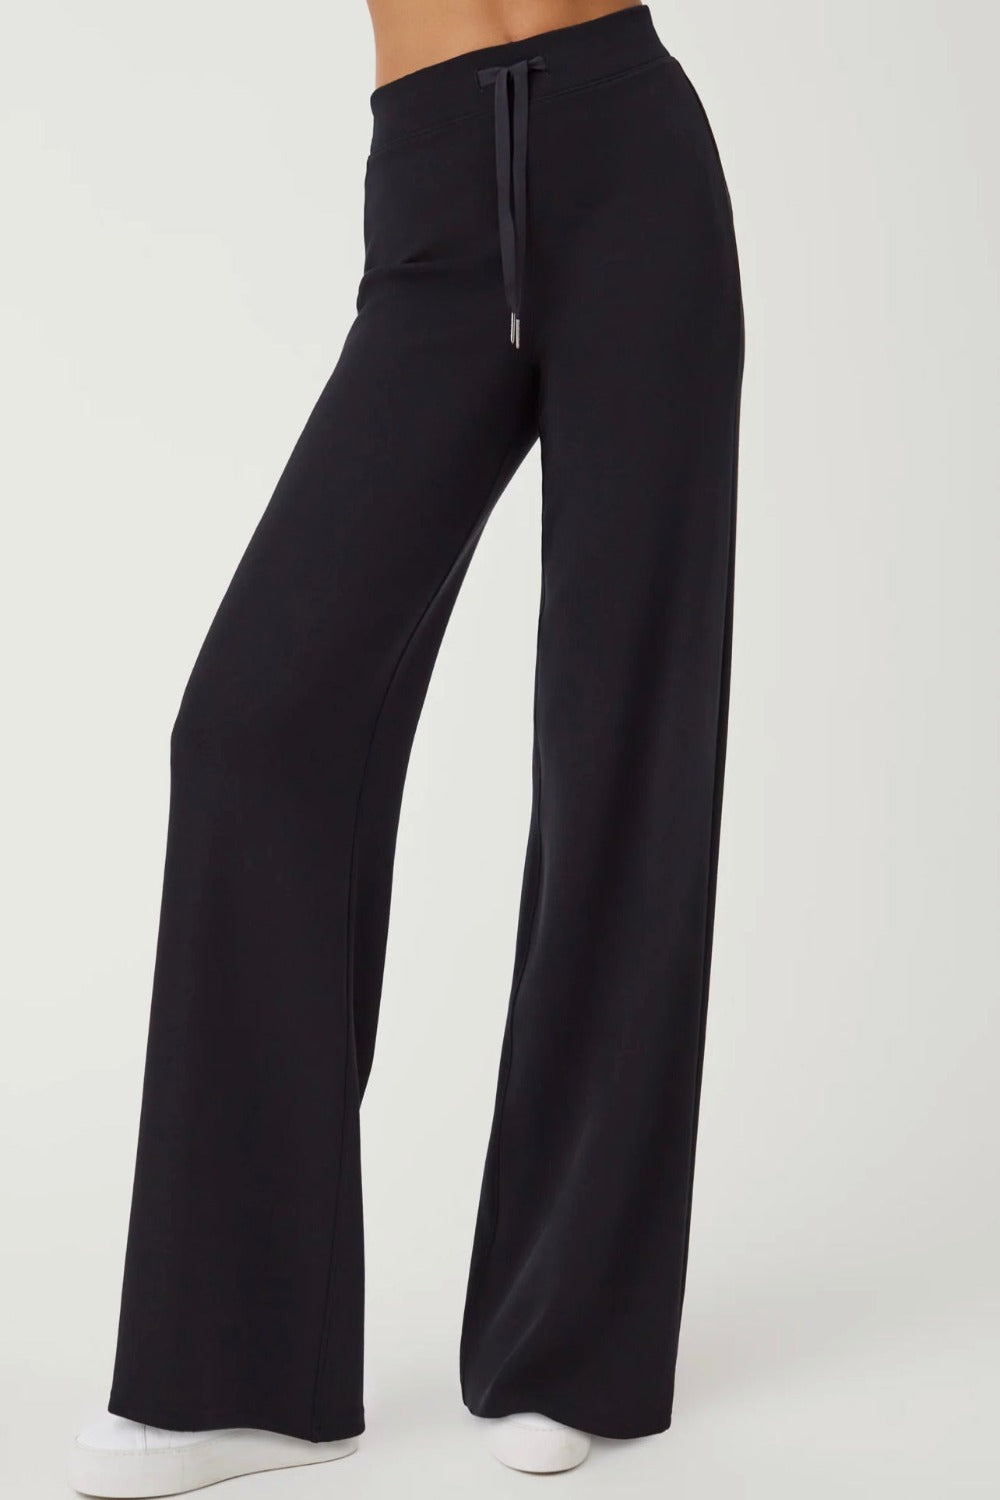 Air Essentials Wide Leg Pant Black – Research and Design